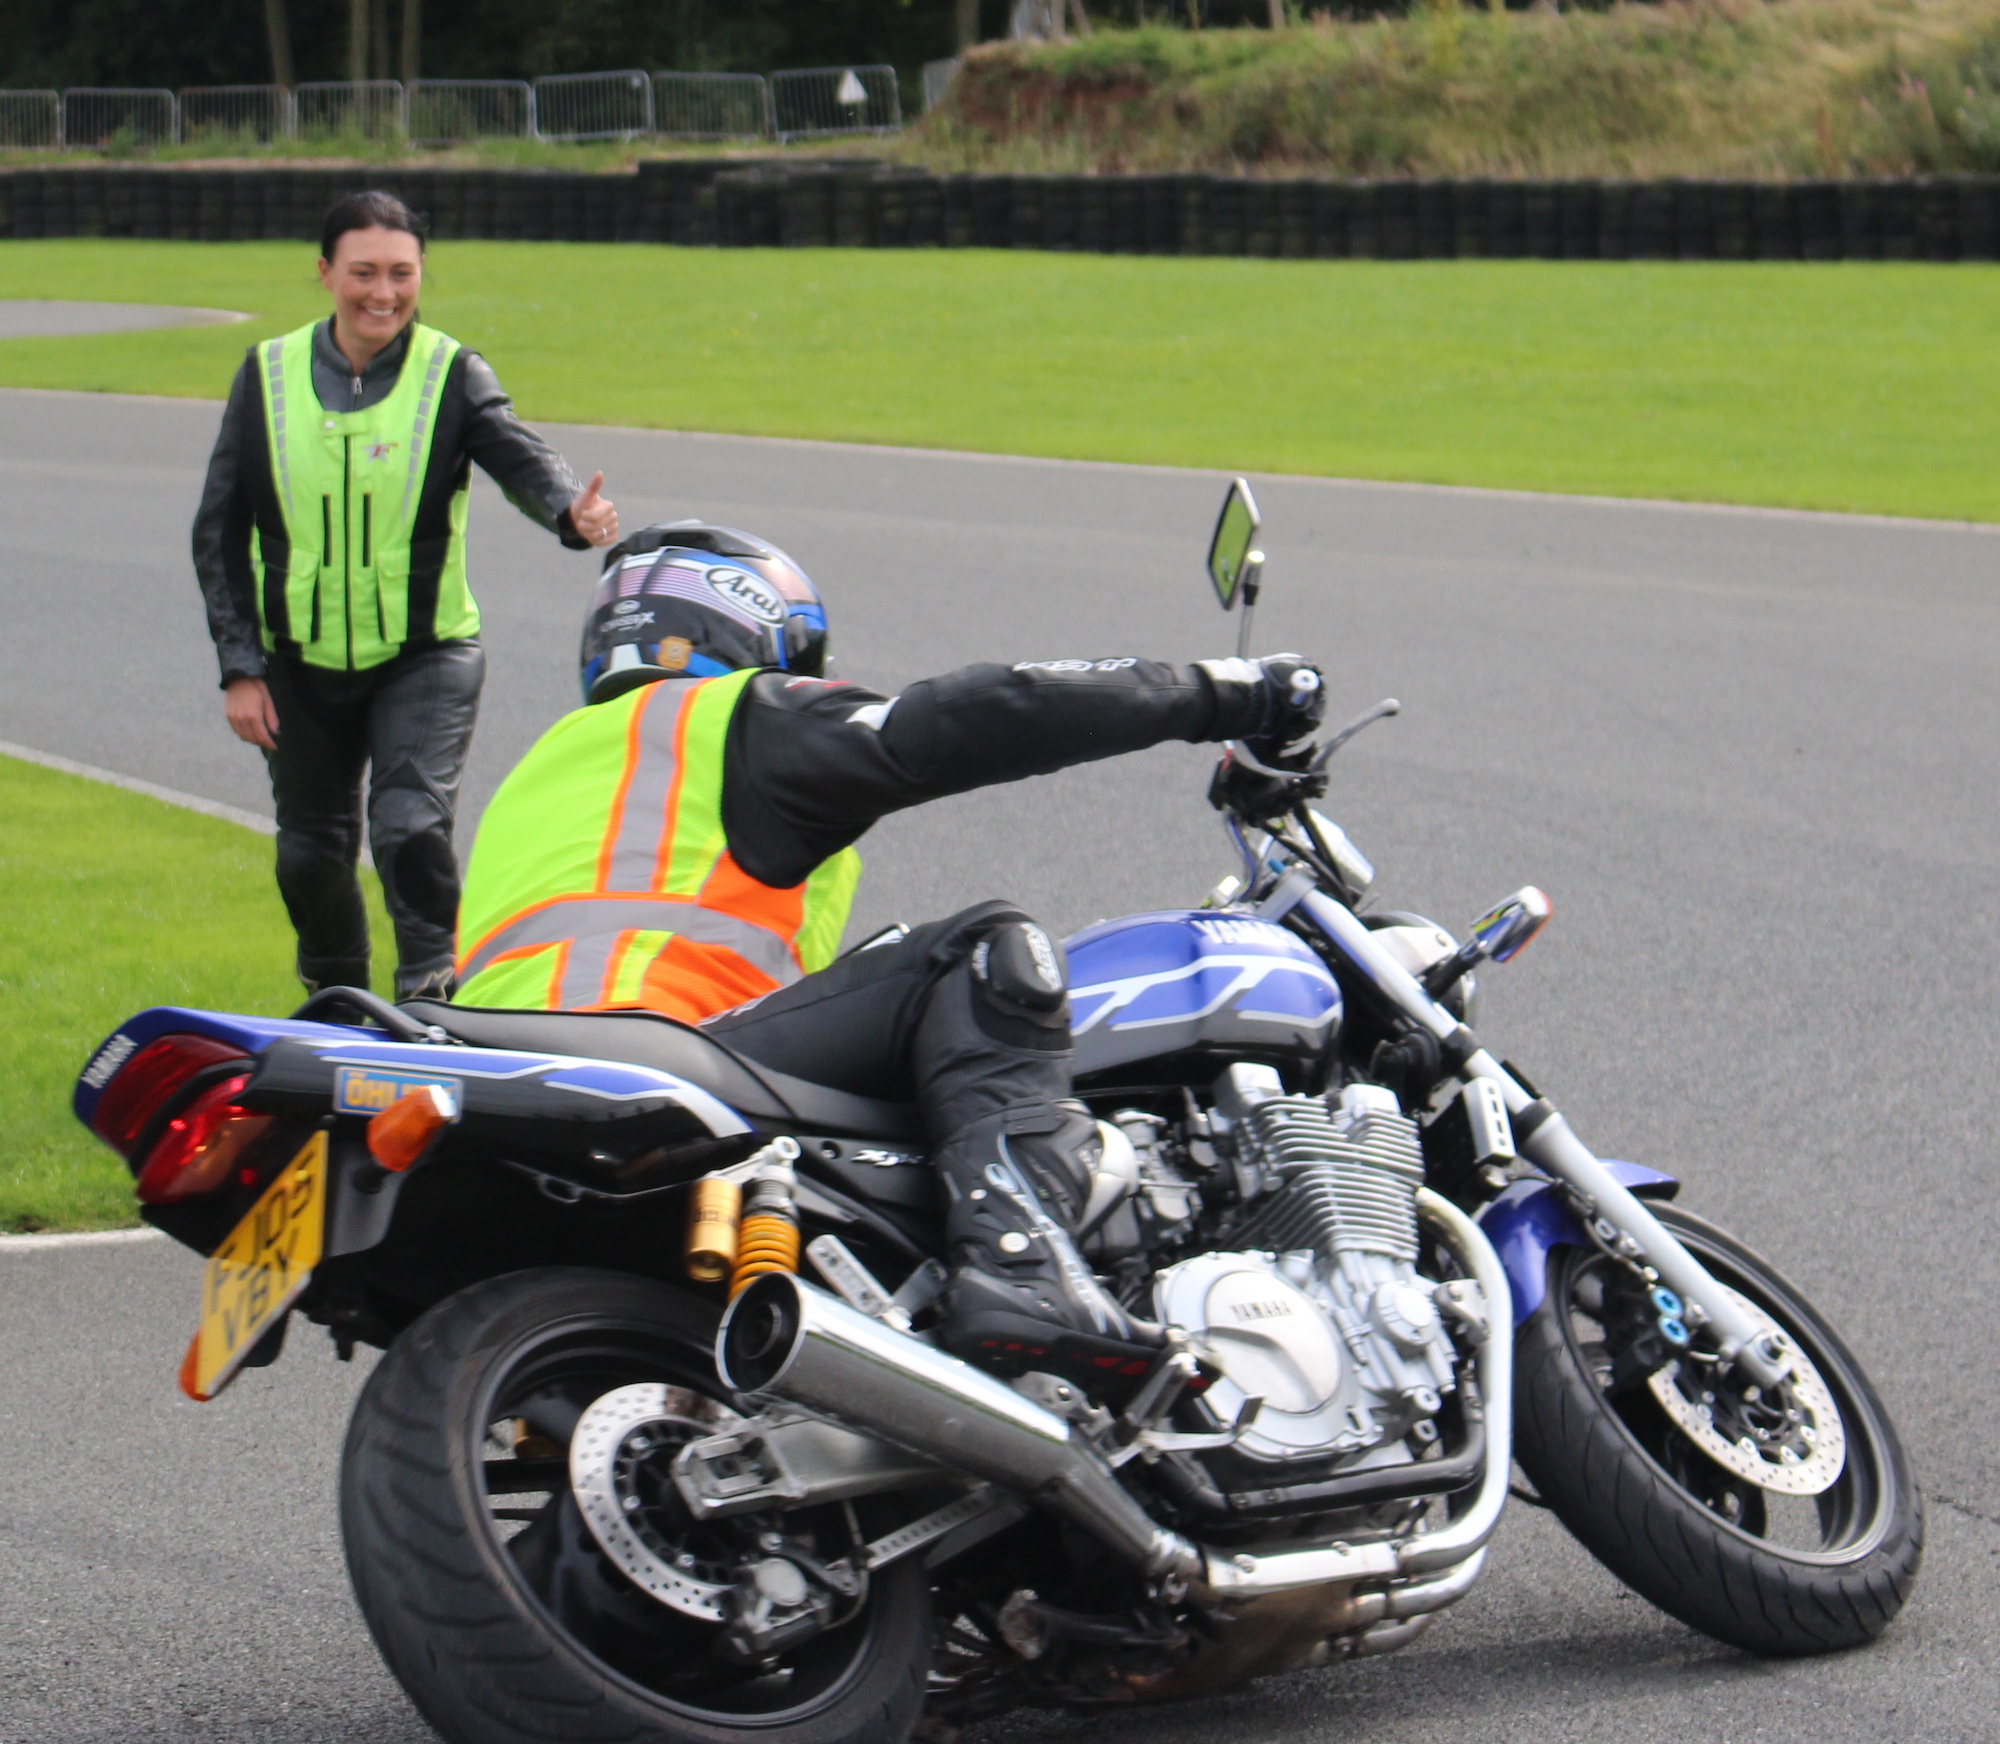 Knee down advanced motorcycle course